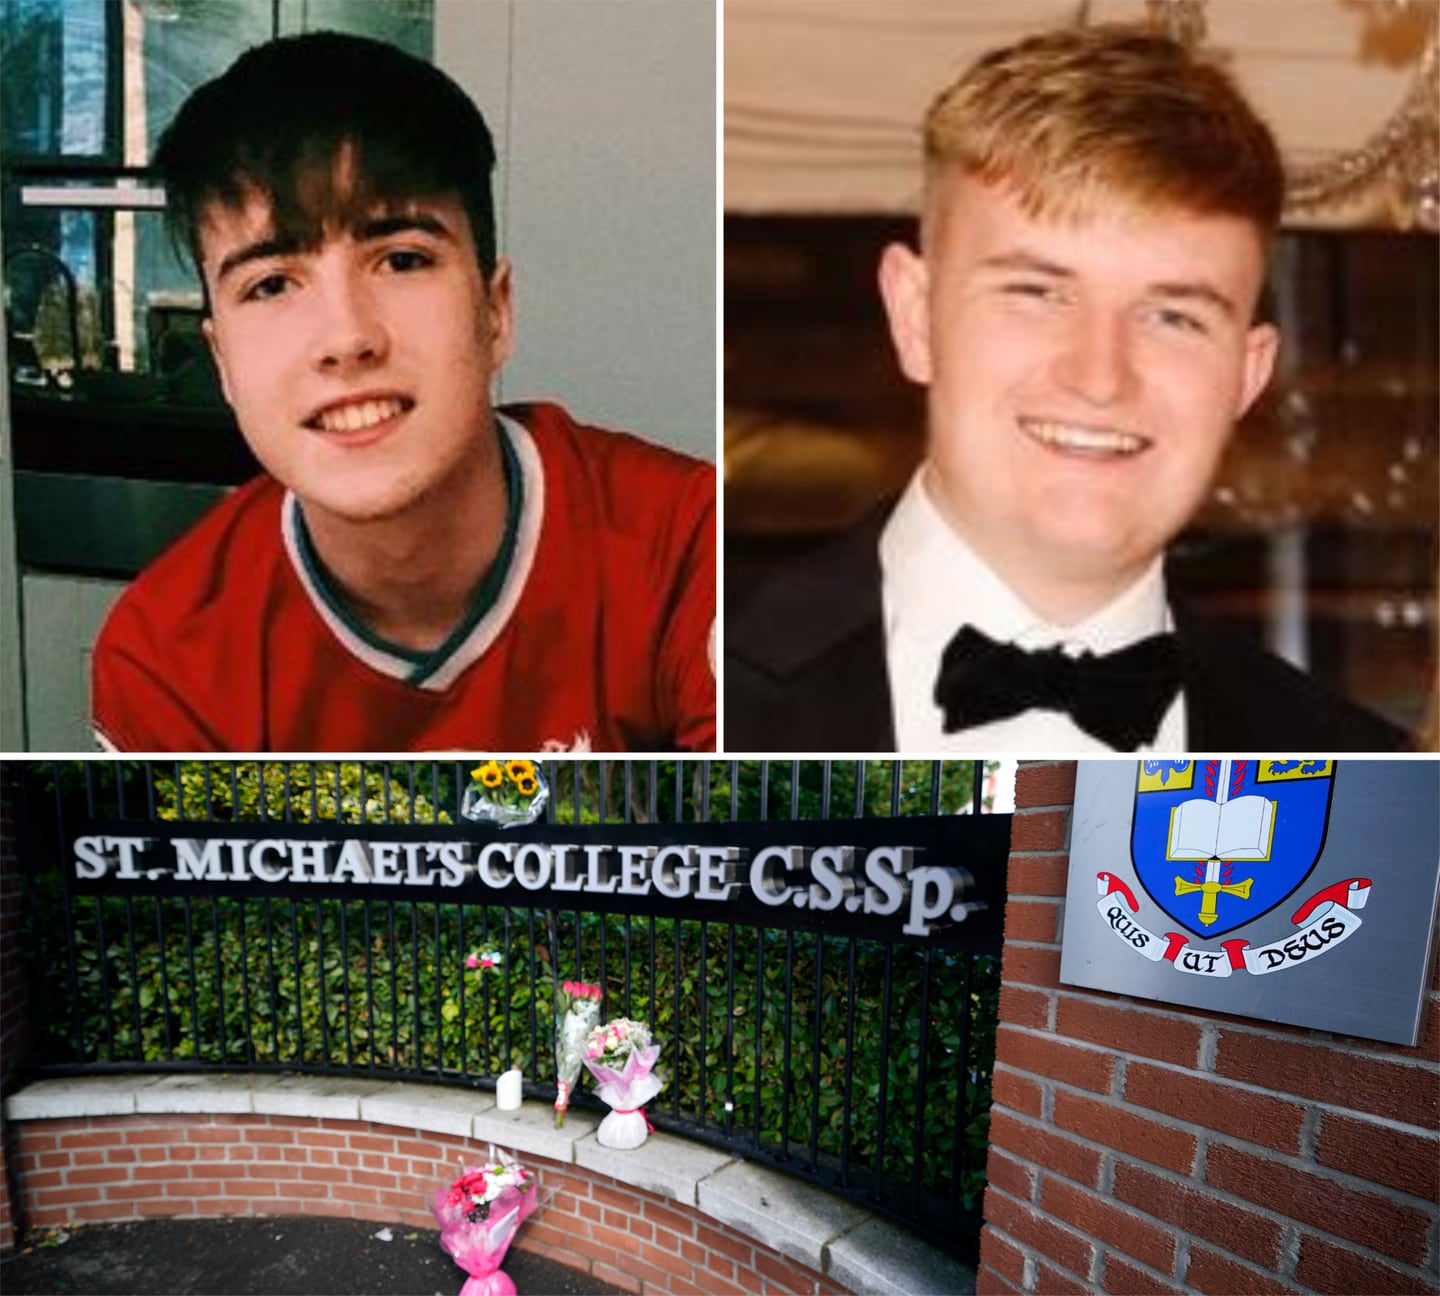 Andrew O’Donnell (18) and Max Wall (18), former students at St Michael's College, were on a post-exam holiday on the Greek island of Ios when they died in separate incidences